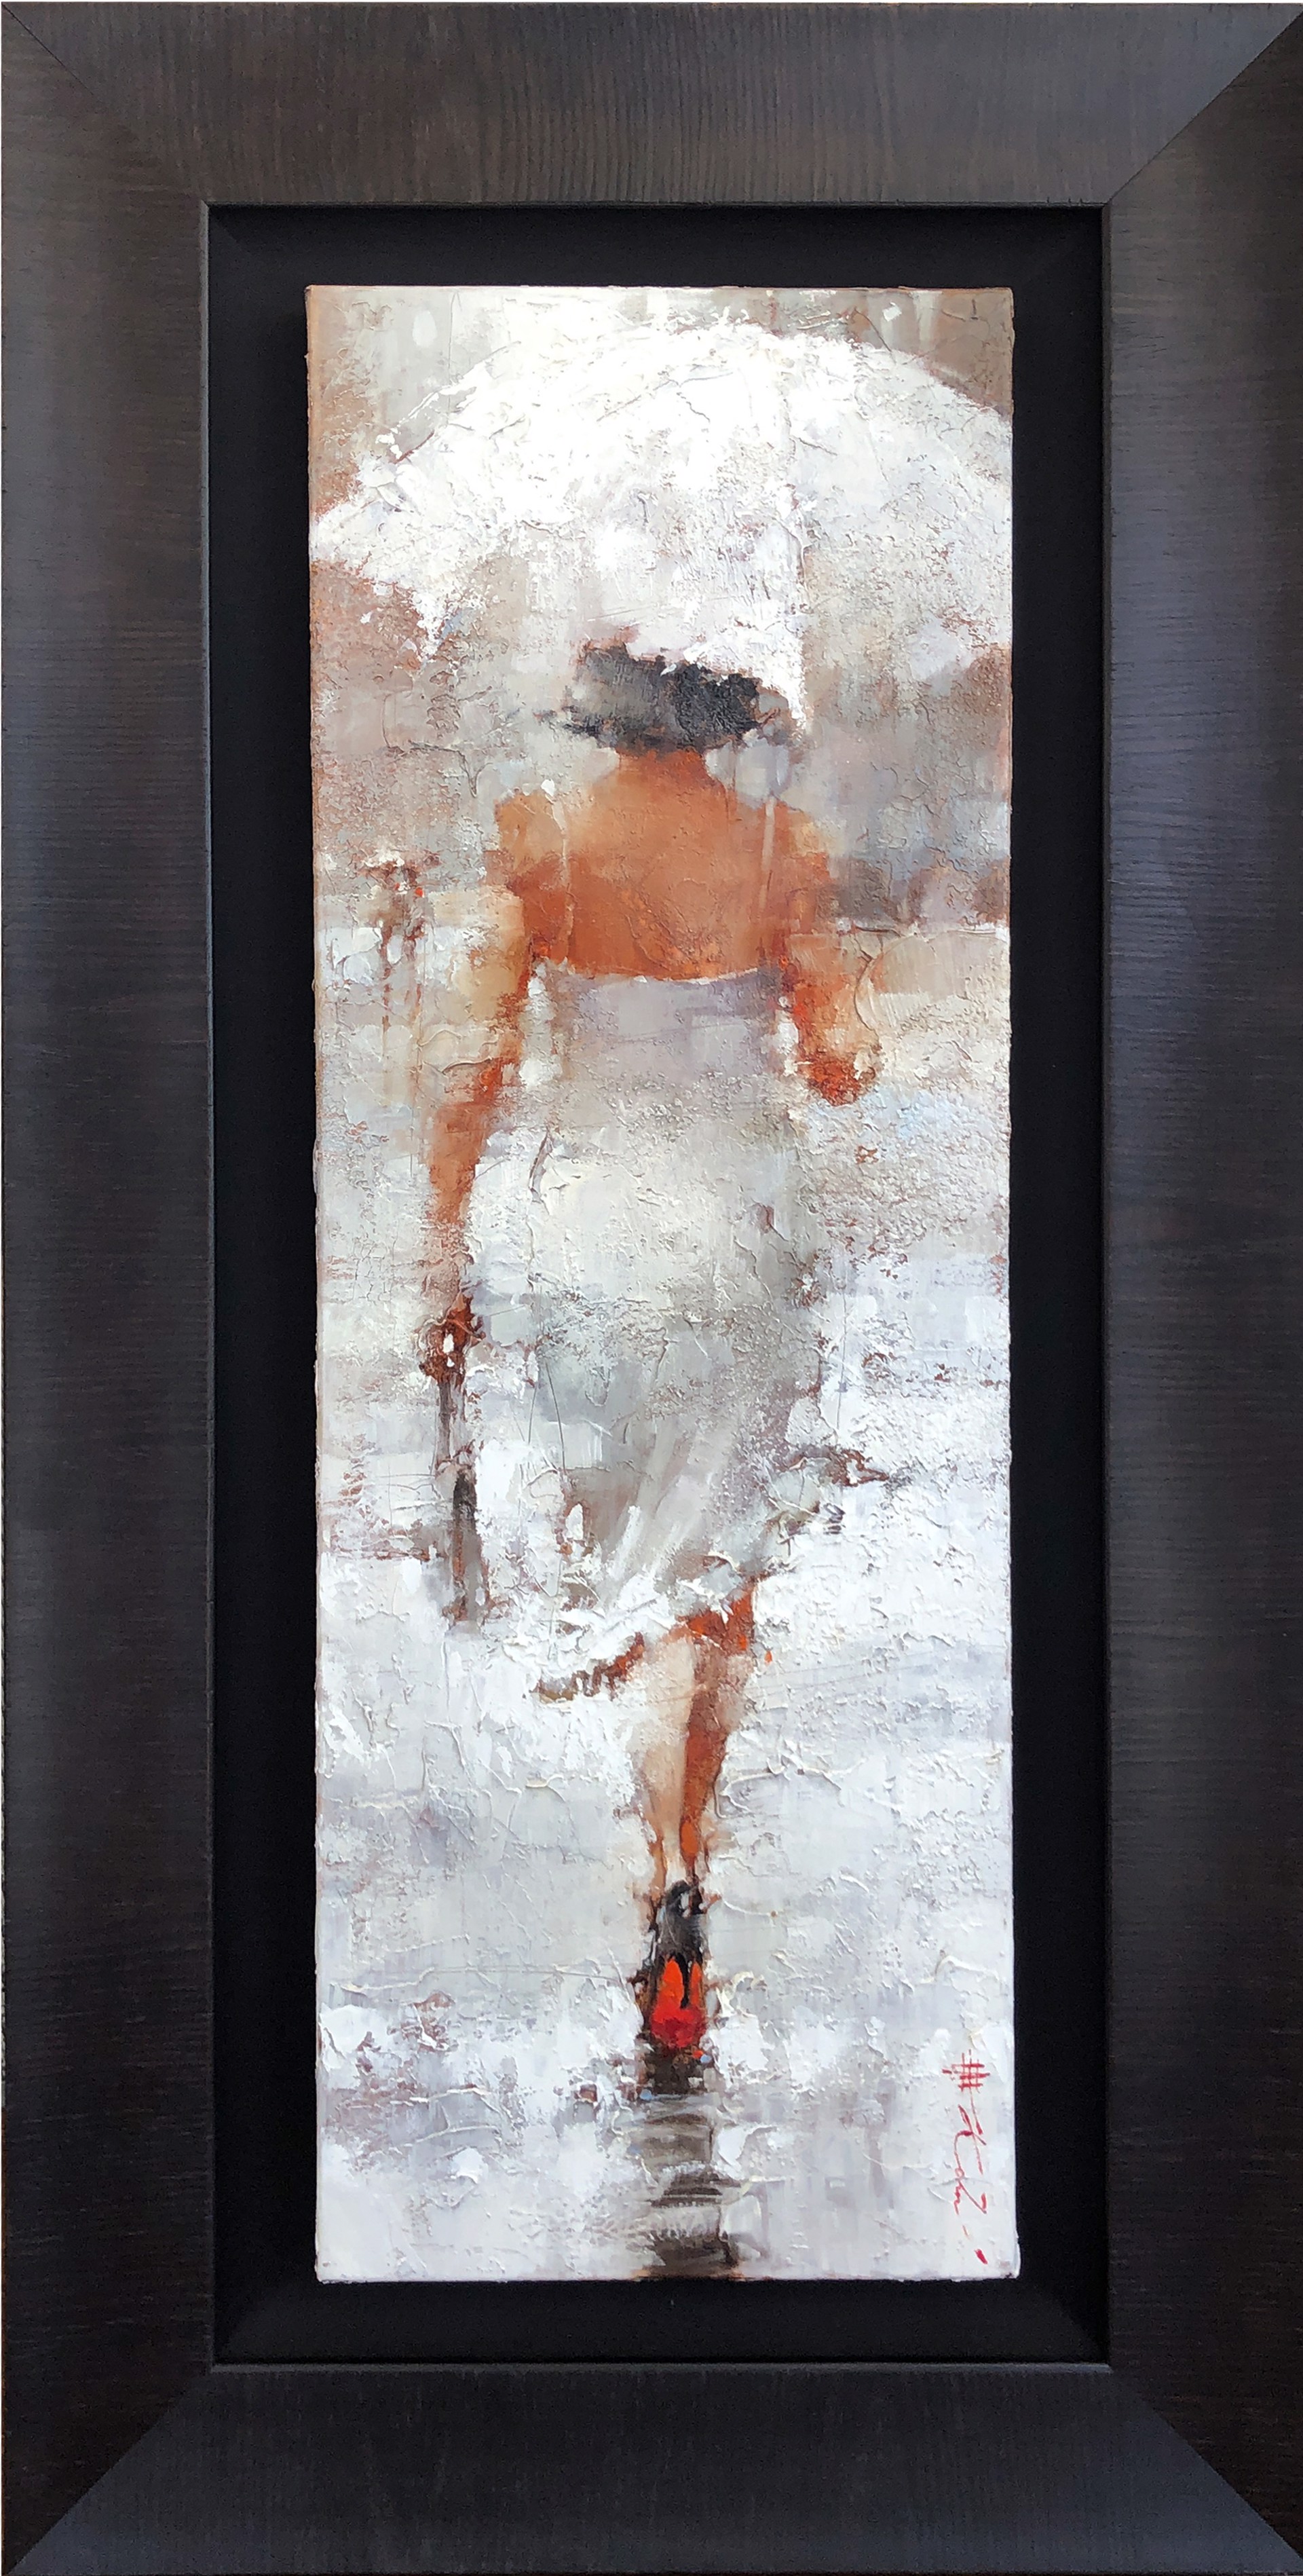 "On The Theme Of White" Series #6 by Andre Kohn